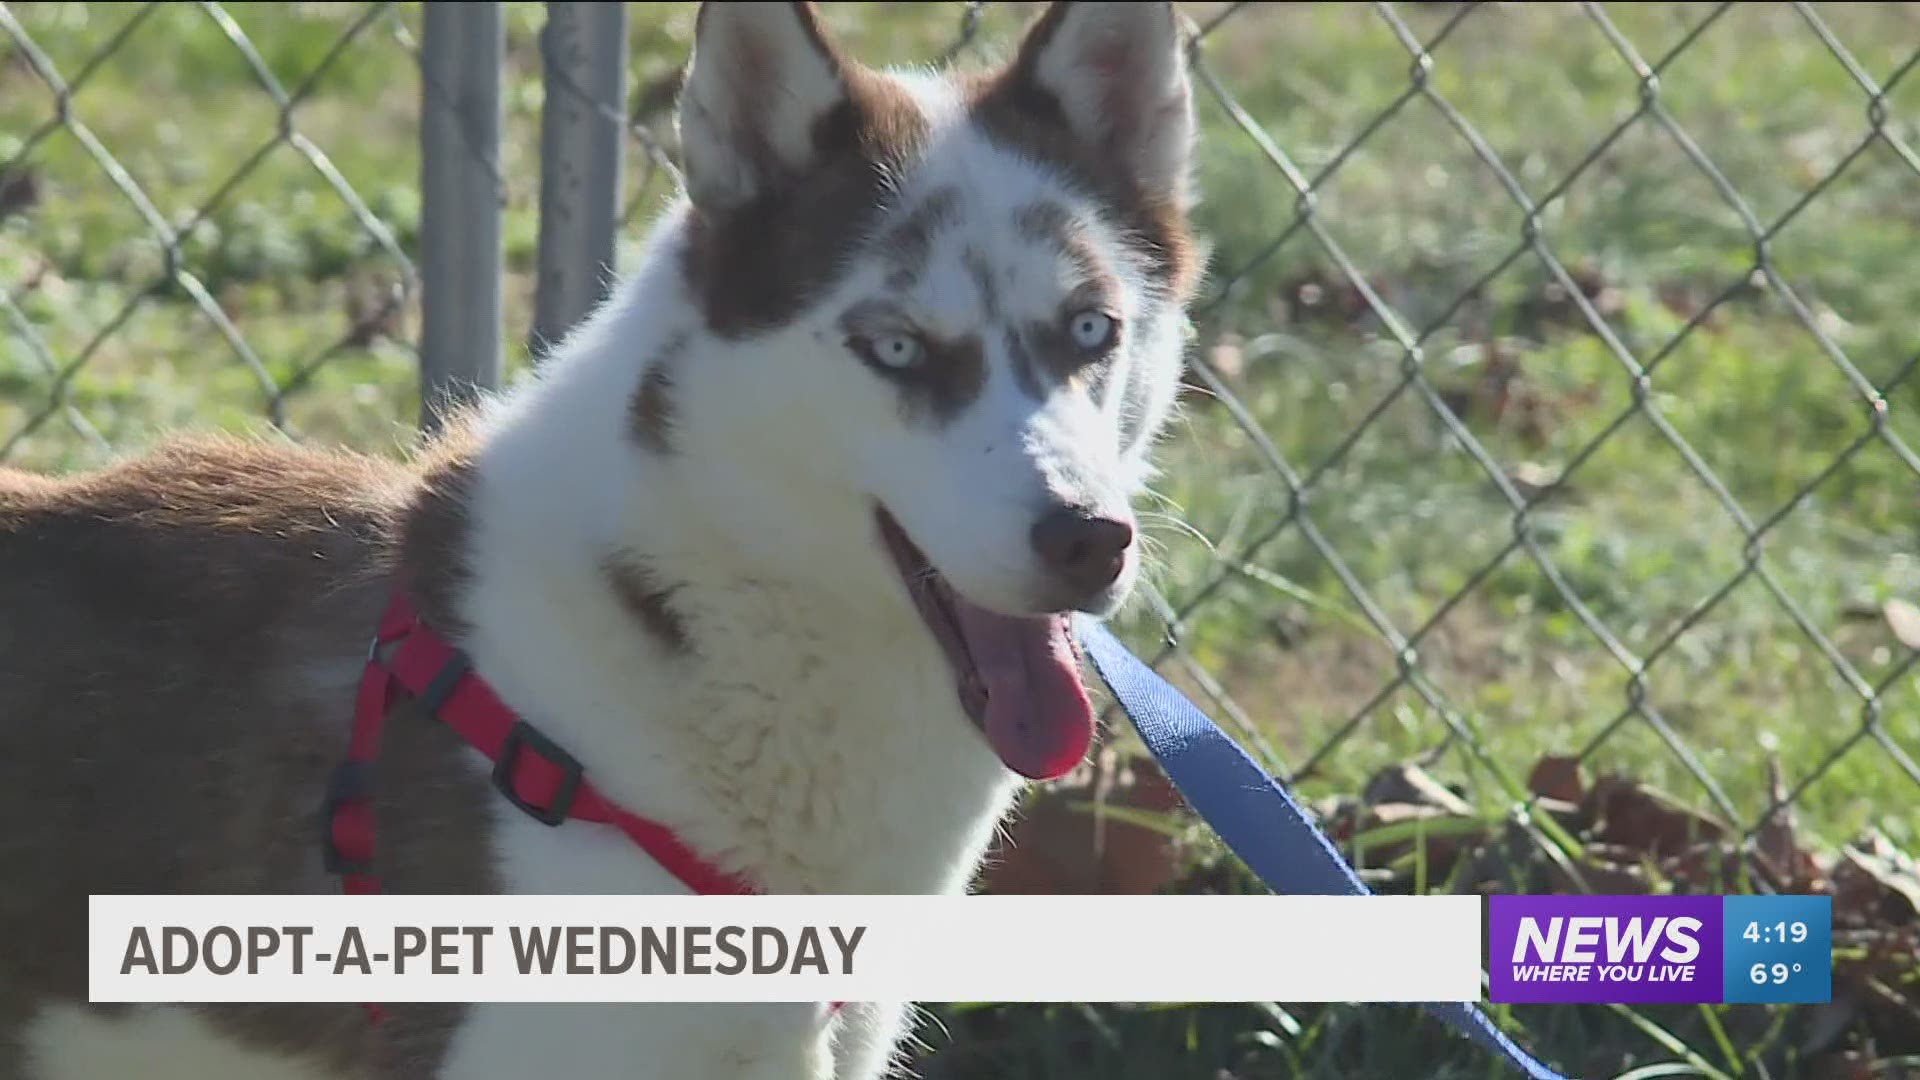 A husky who was on the run and a young pup looking for adventures with a new family are up for adoption at Tailwaggers of NWA. https://bit.ly/2IvXTUS